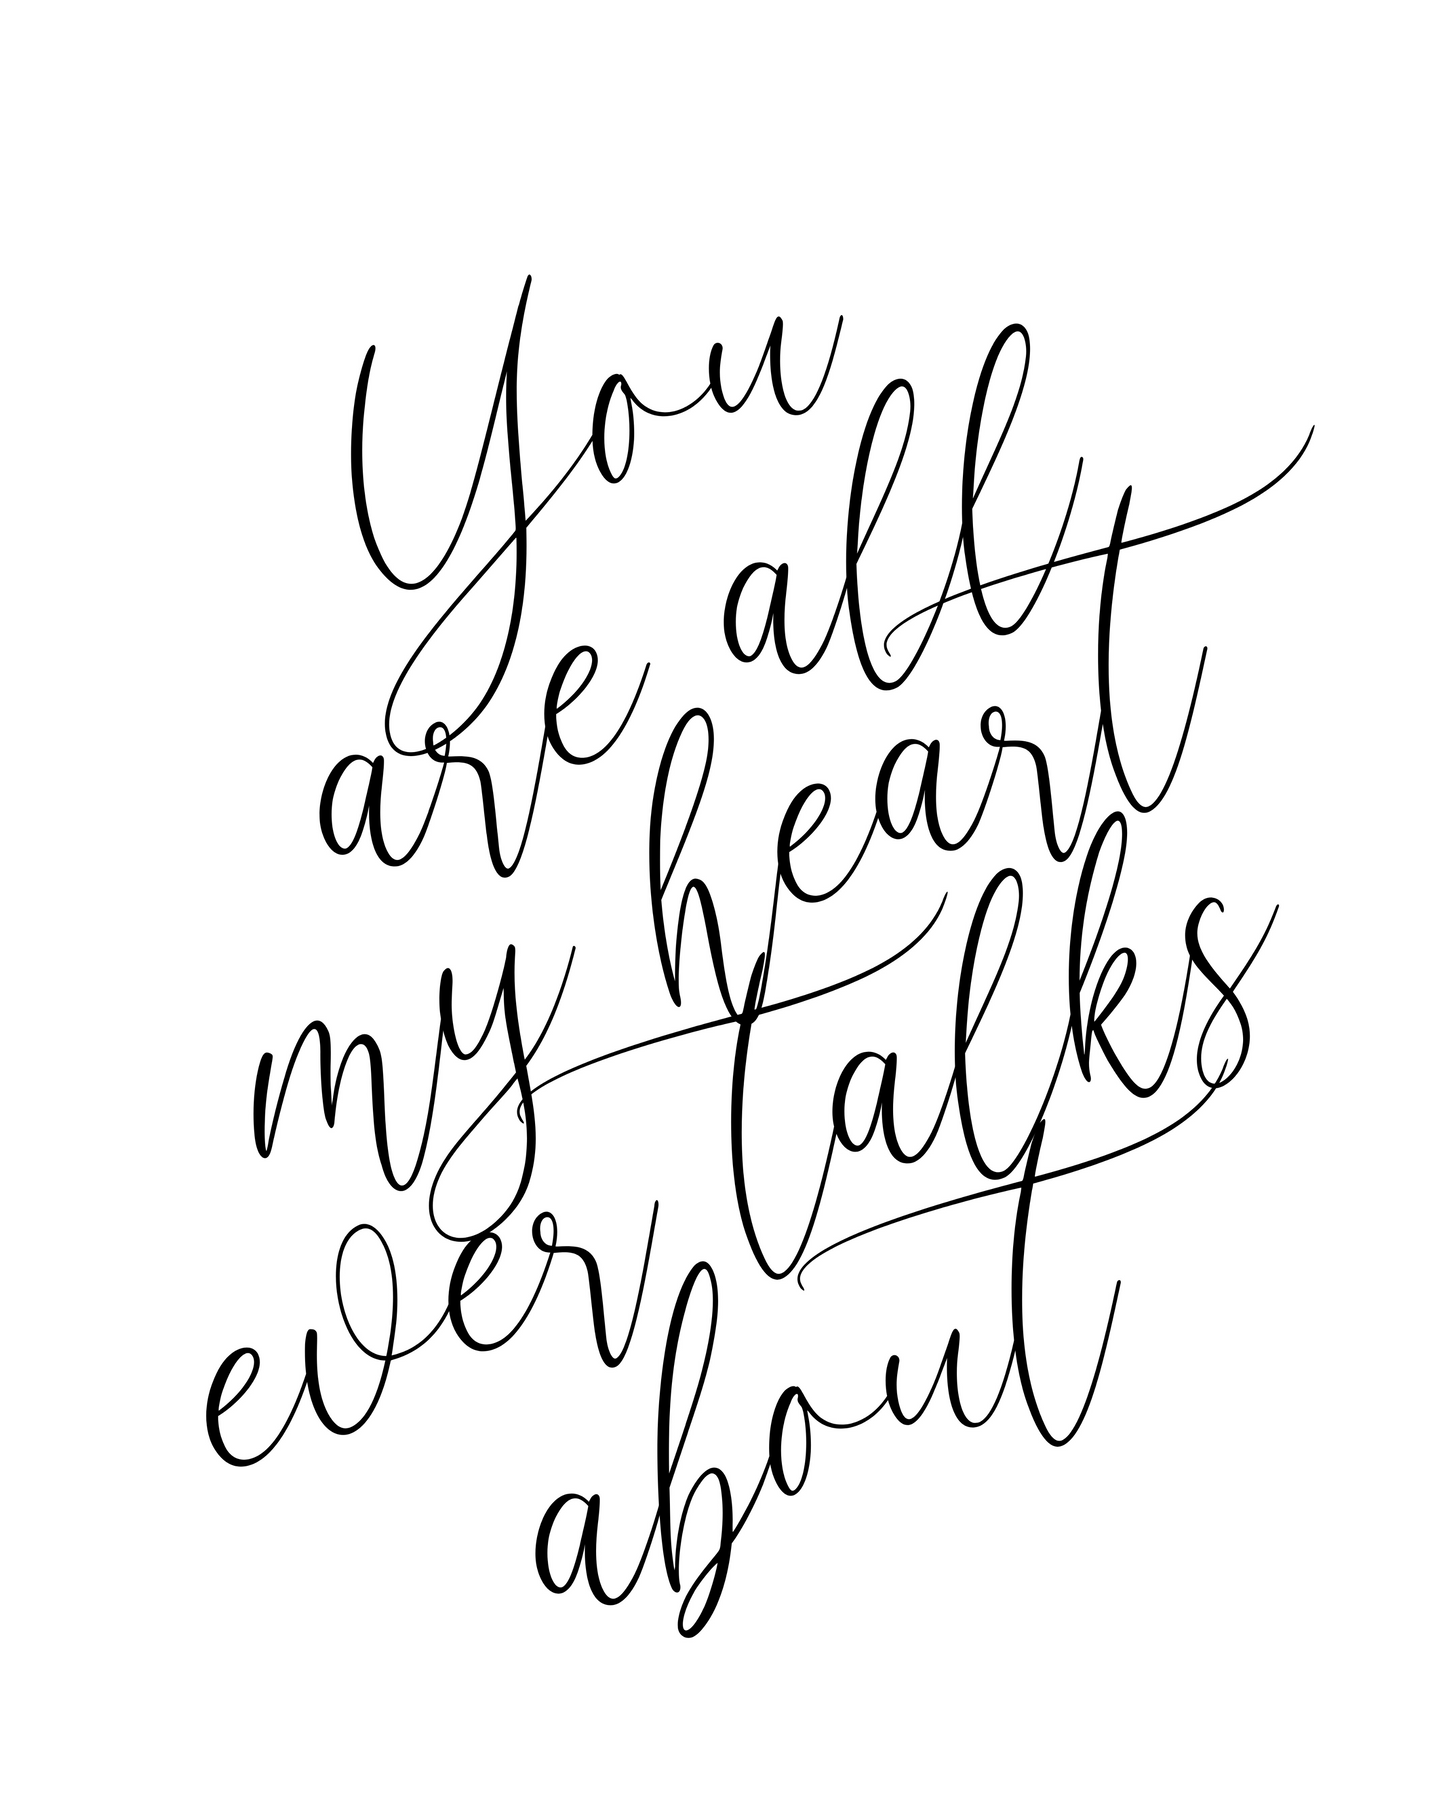 "You Are All My Heart Ever Talks About" Cursive Script, Love Quotes, Printable Art